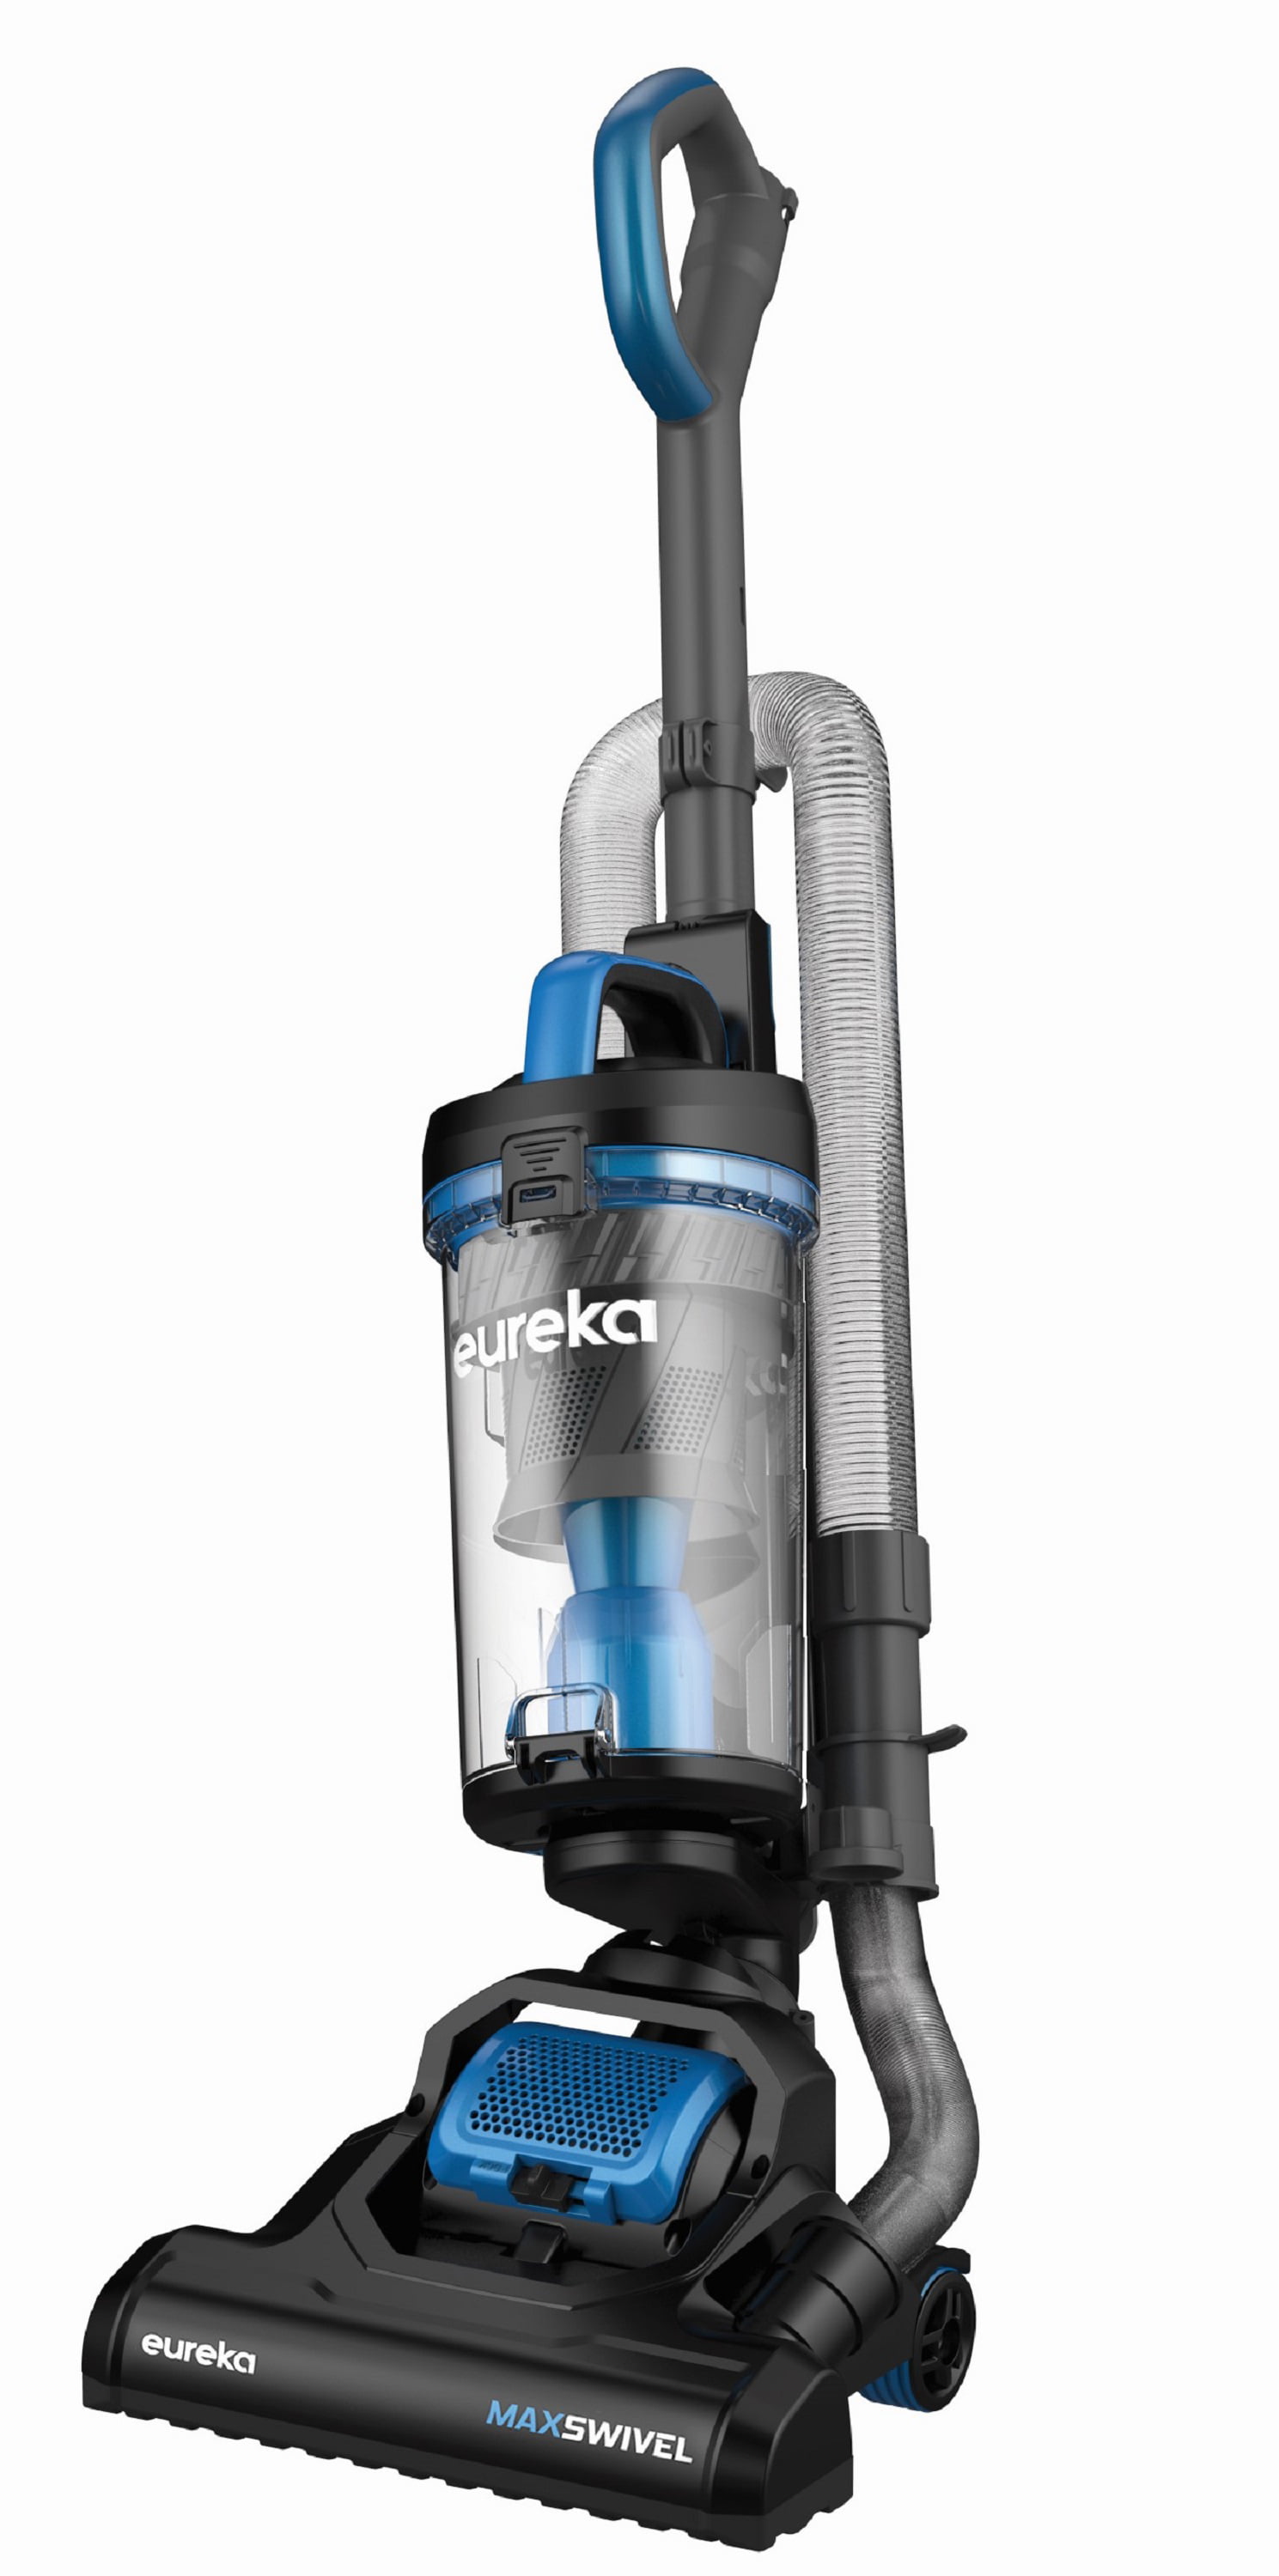 EUREKA Max Swivel Deluxe Upright Multi-Surface Vacuum with No Loss of Suction & Swivel Steering NEU250C 